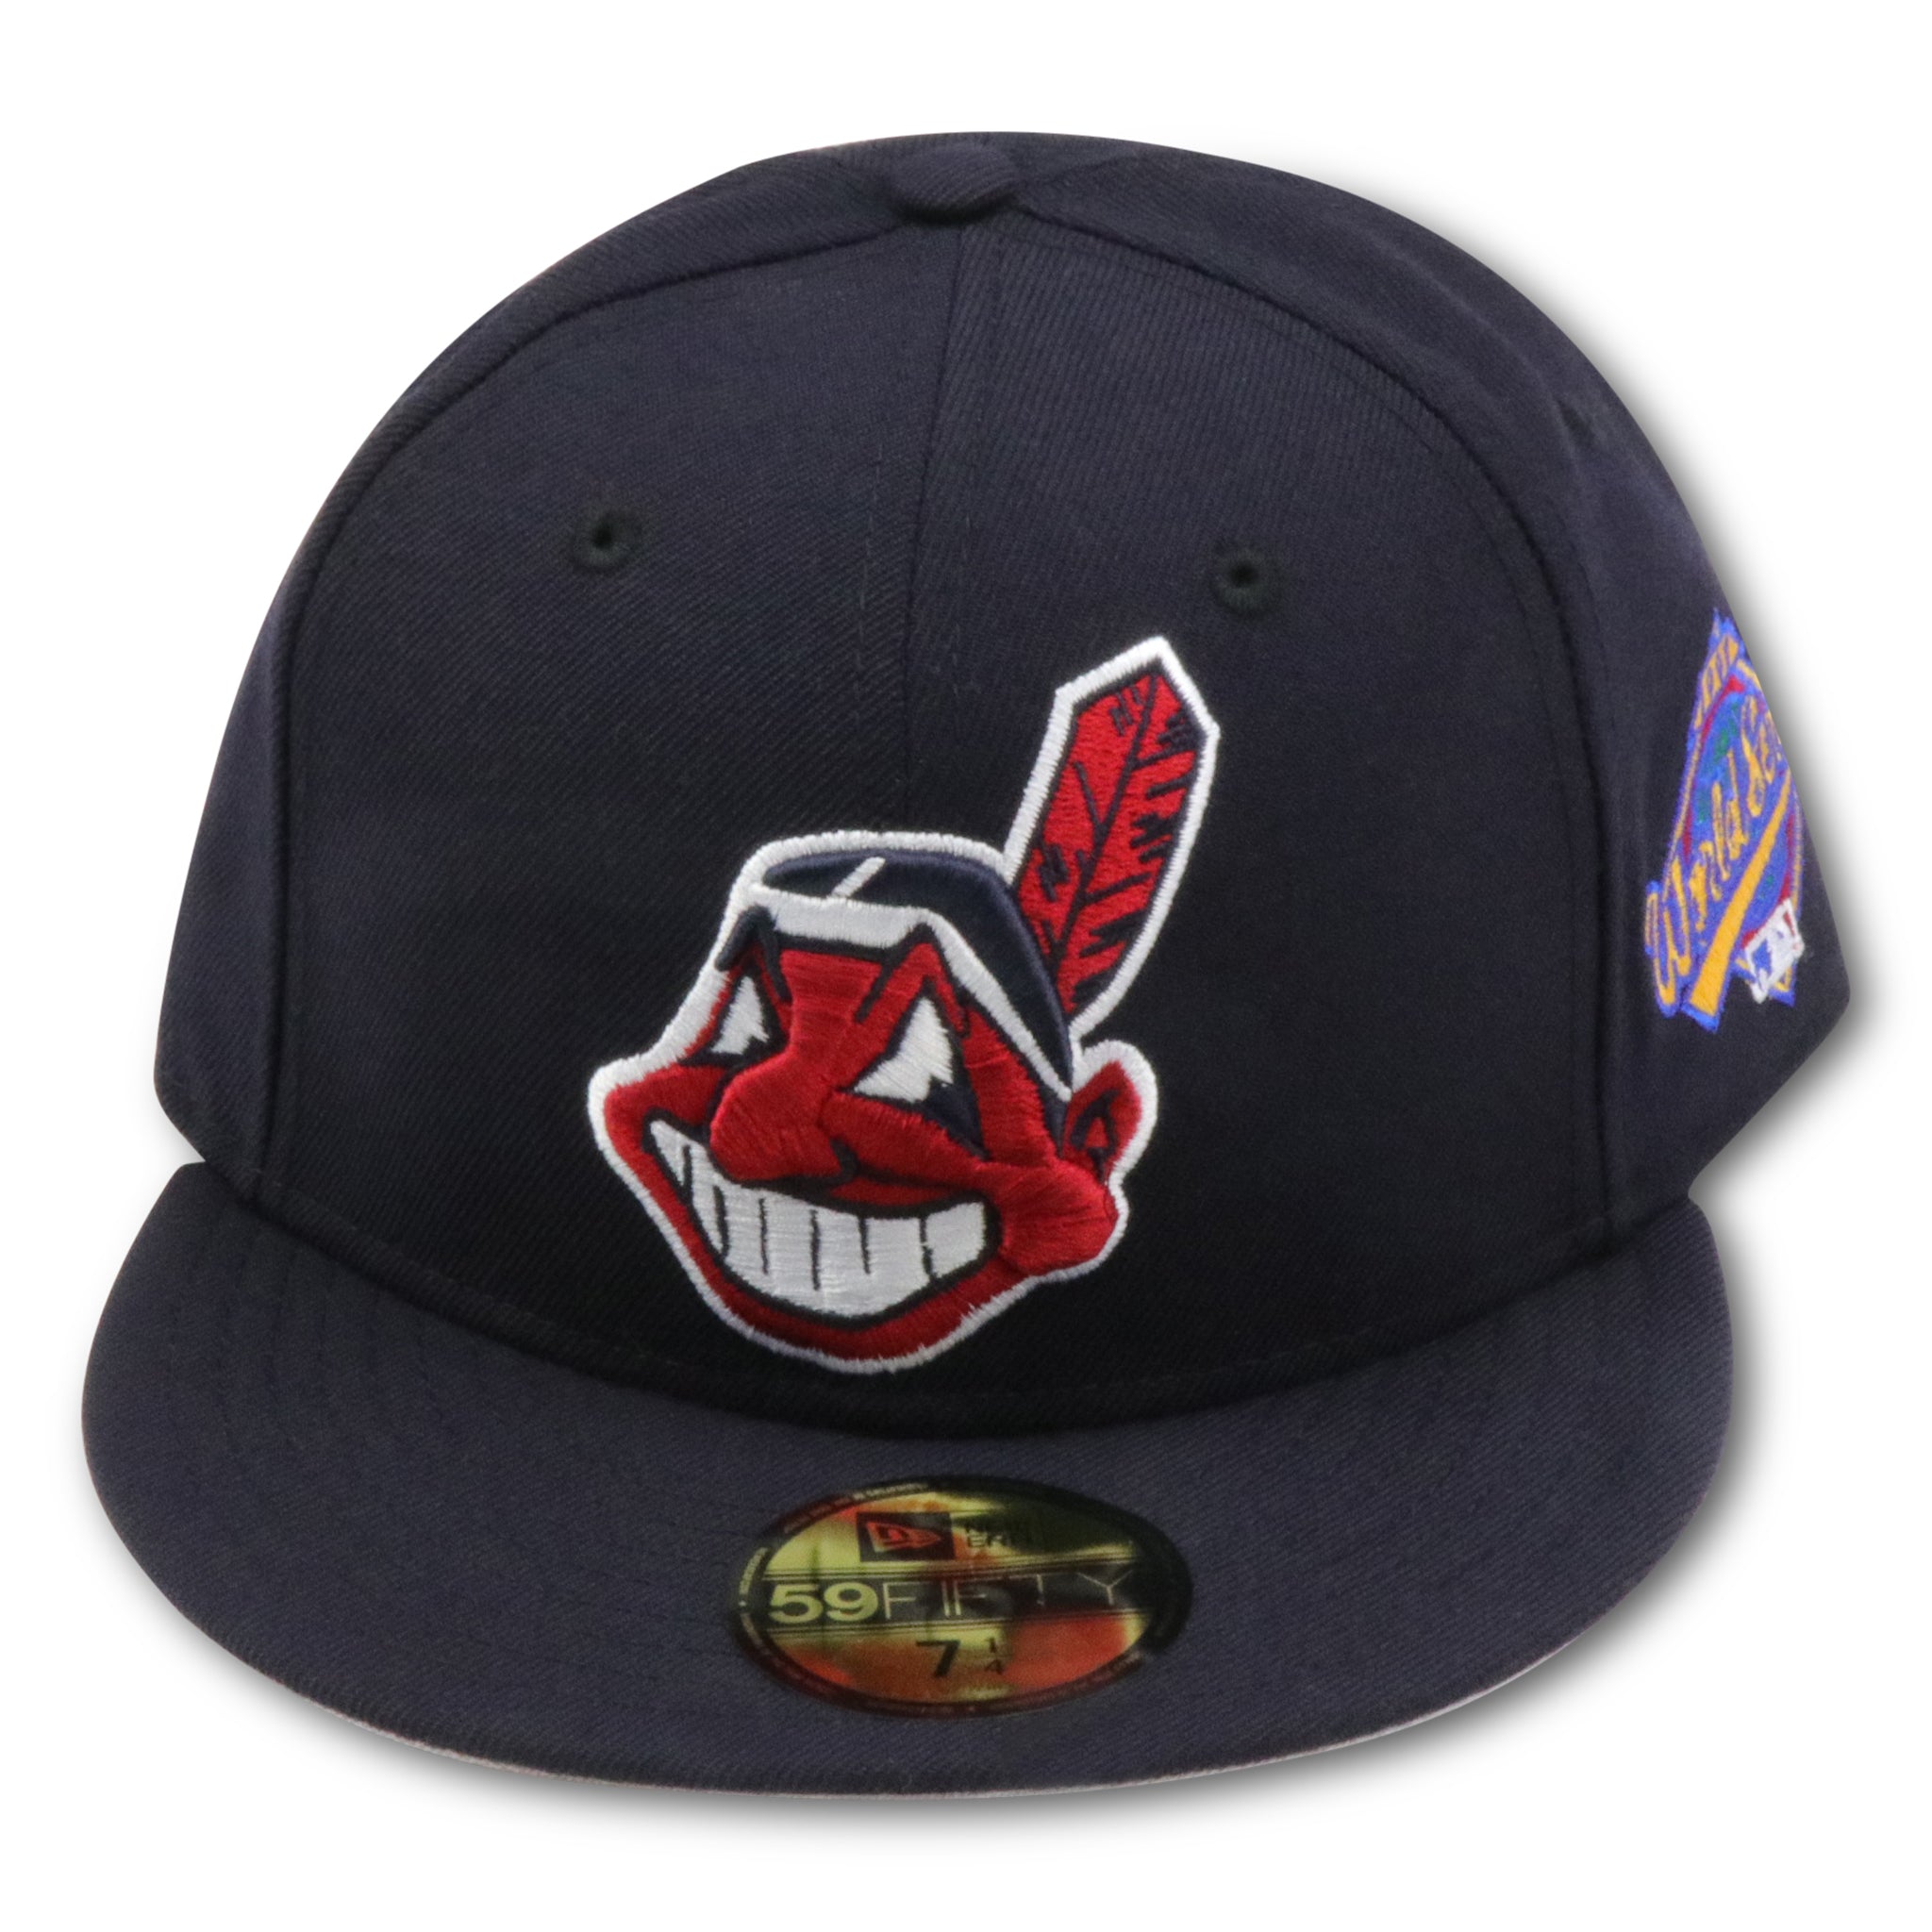 CLEVELAND INDIANS (1997 WORLDSERIES) NEW ERA 59FIFTY FITTED (ALL NAVY)